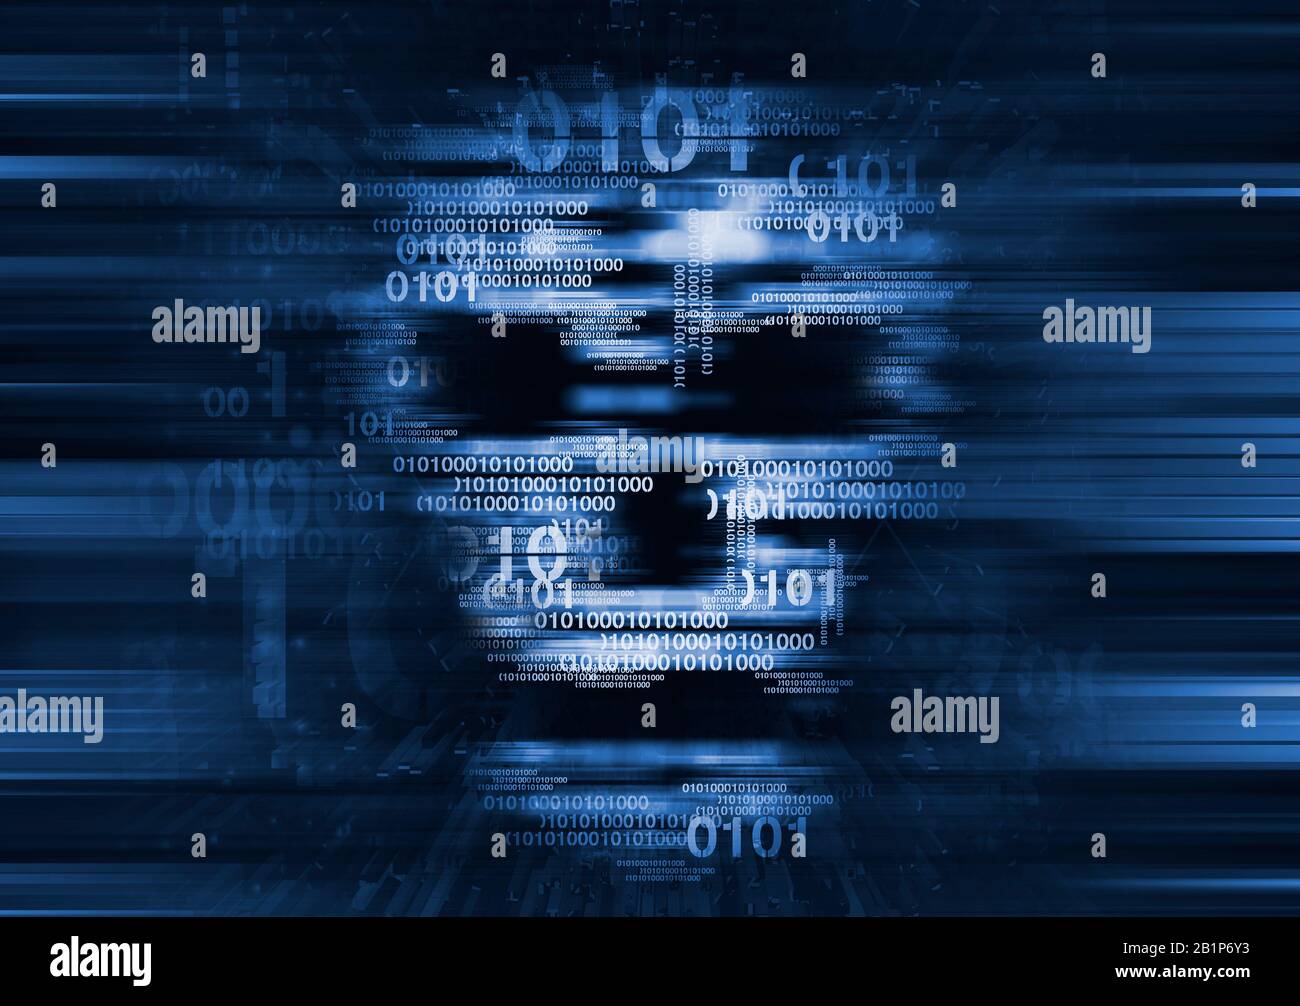 Skull,Hacker,Computer virus concept. Illustration of Abstract Skull sign on blue background with blurry binary codes. Concept for online piracy. Stock Photo